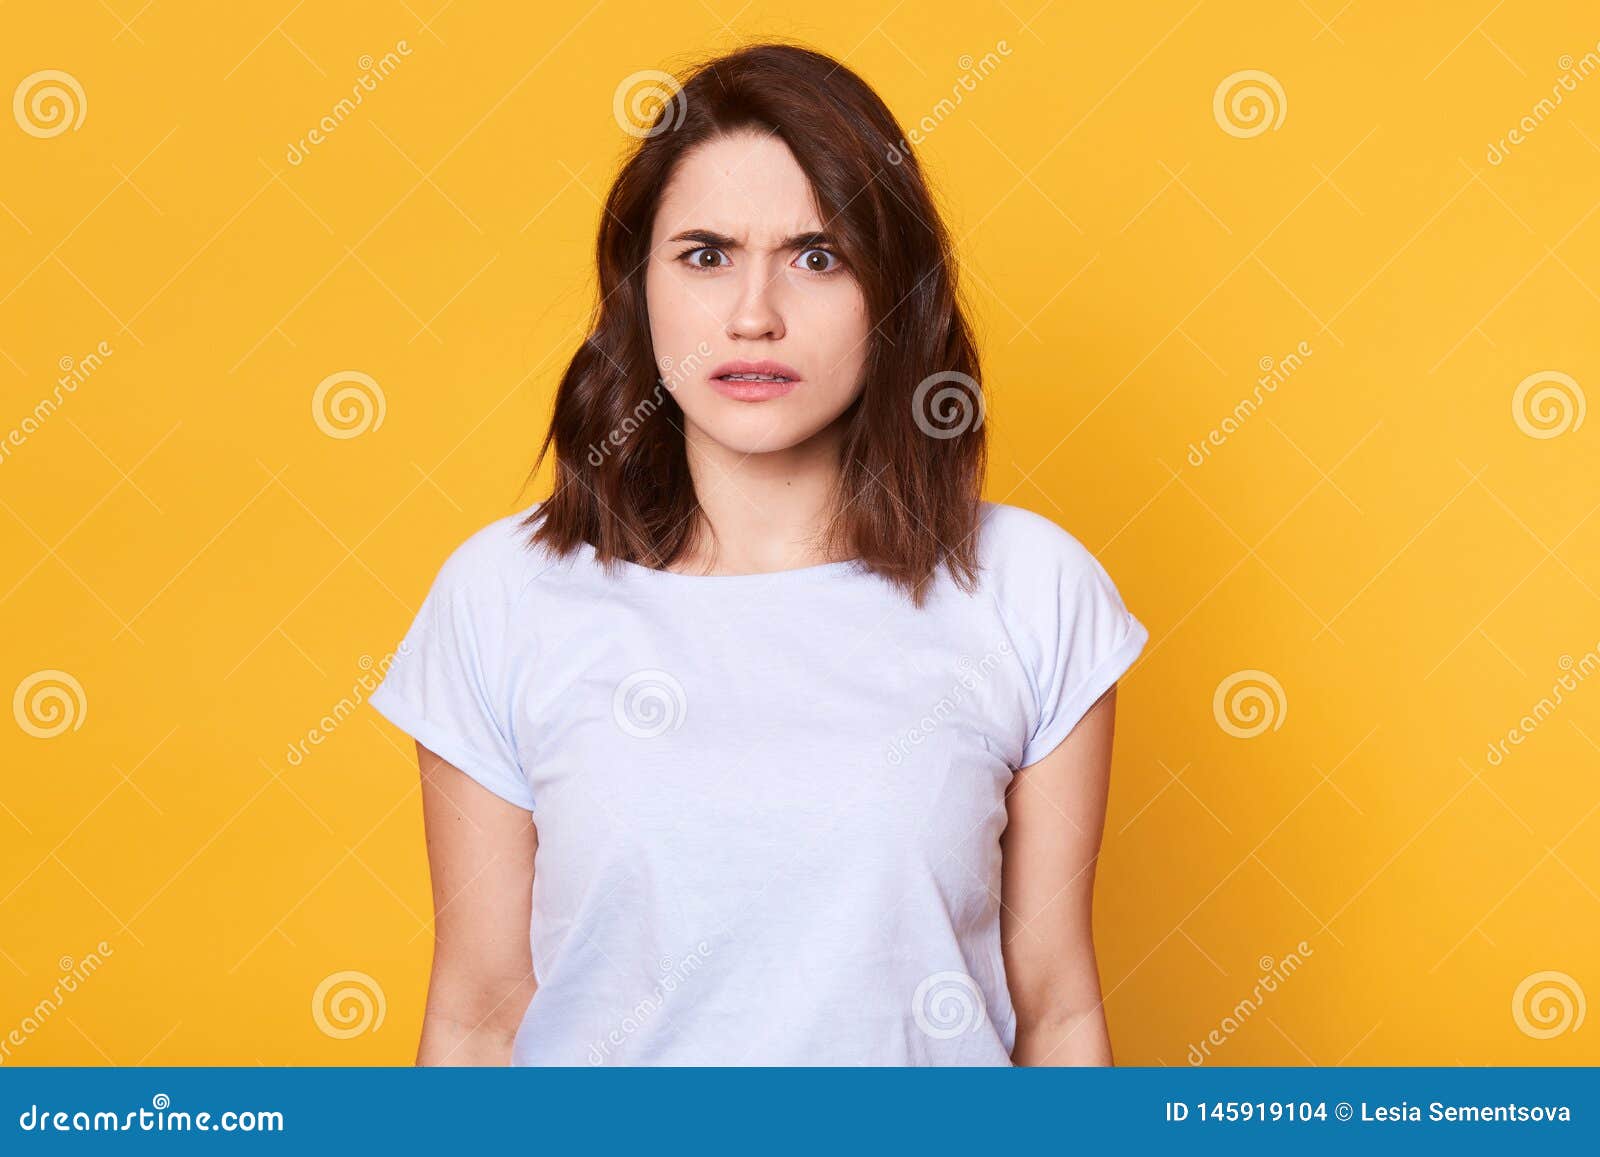 brunette woman in casual clothes expressing disgust, dislikes something, having tensive look frowning face. cauasian woman with